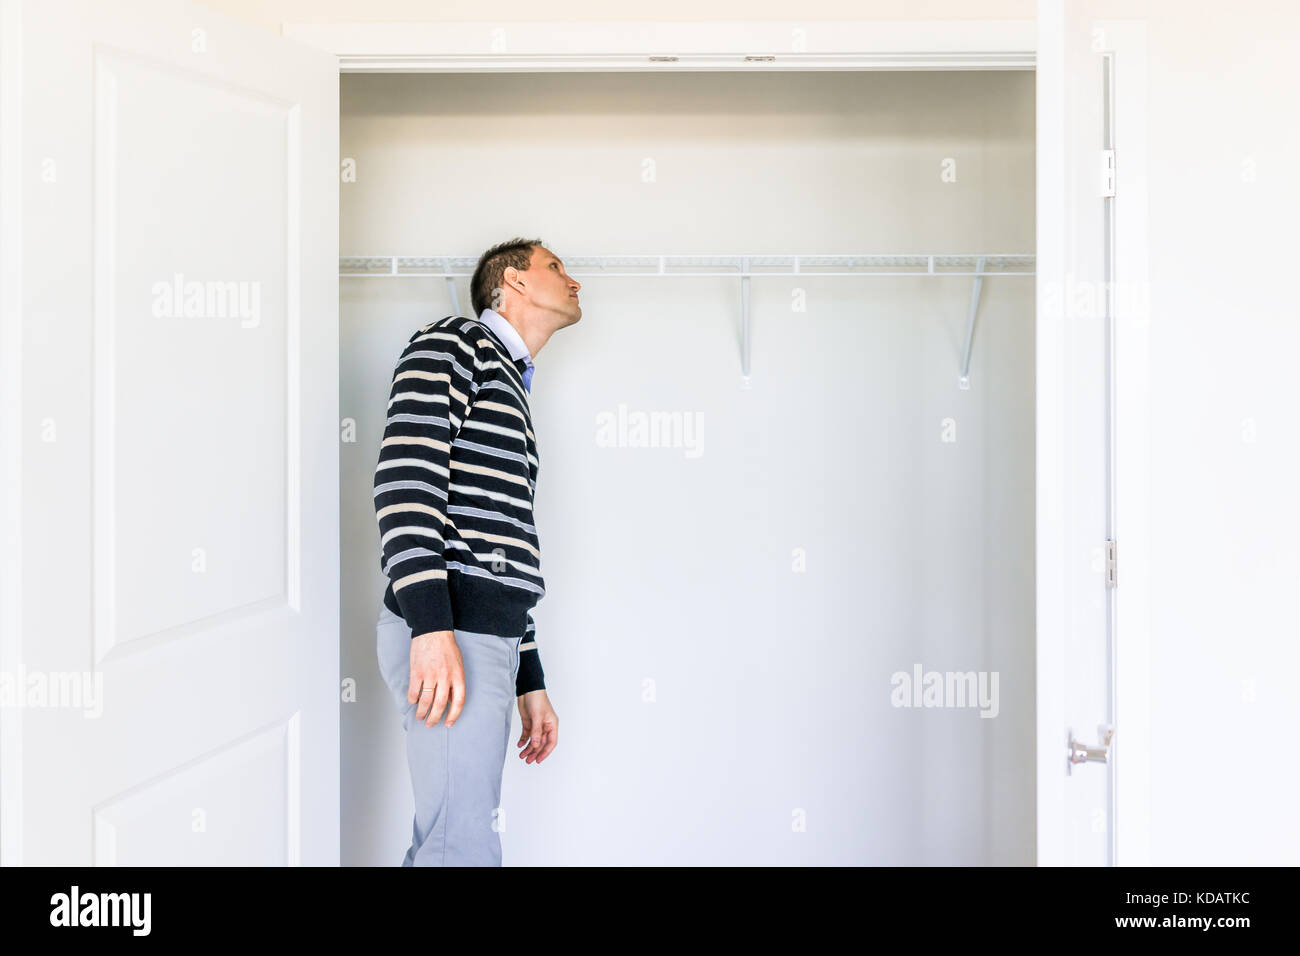 Young man checking looking inside small closet in new room after or before moving in, during open house Stock Photo